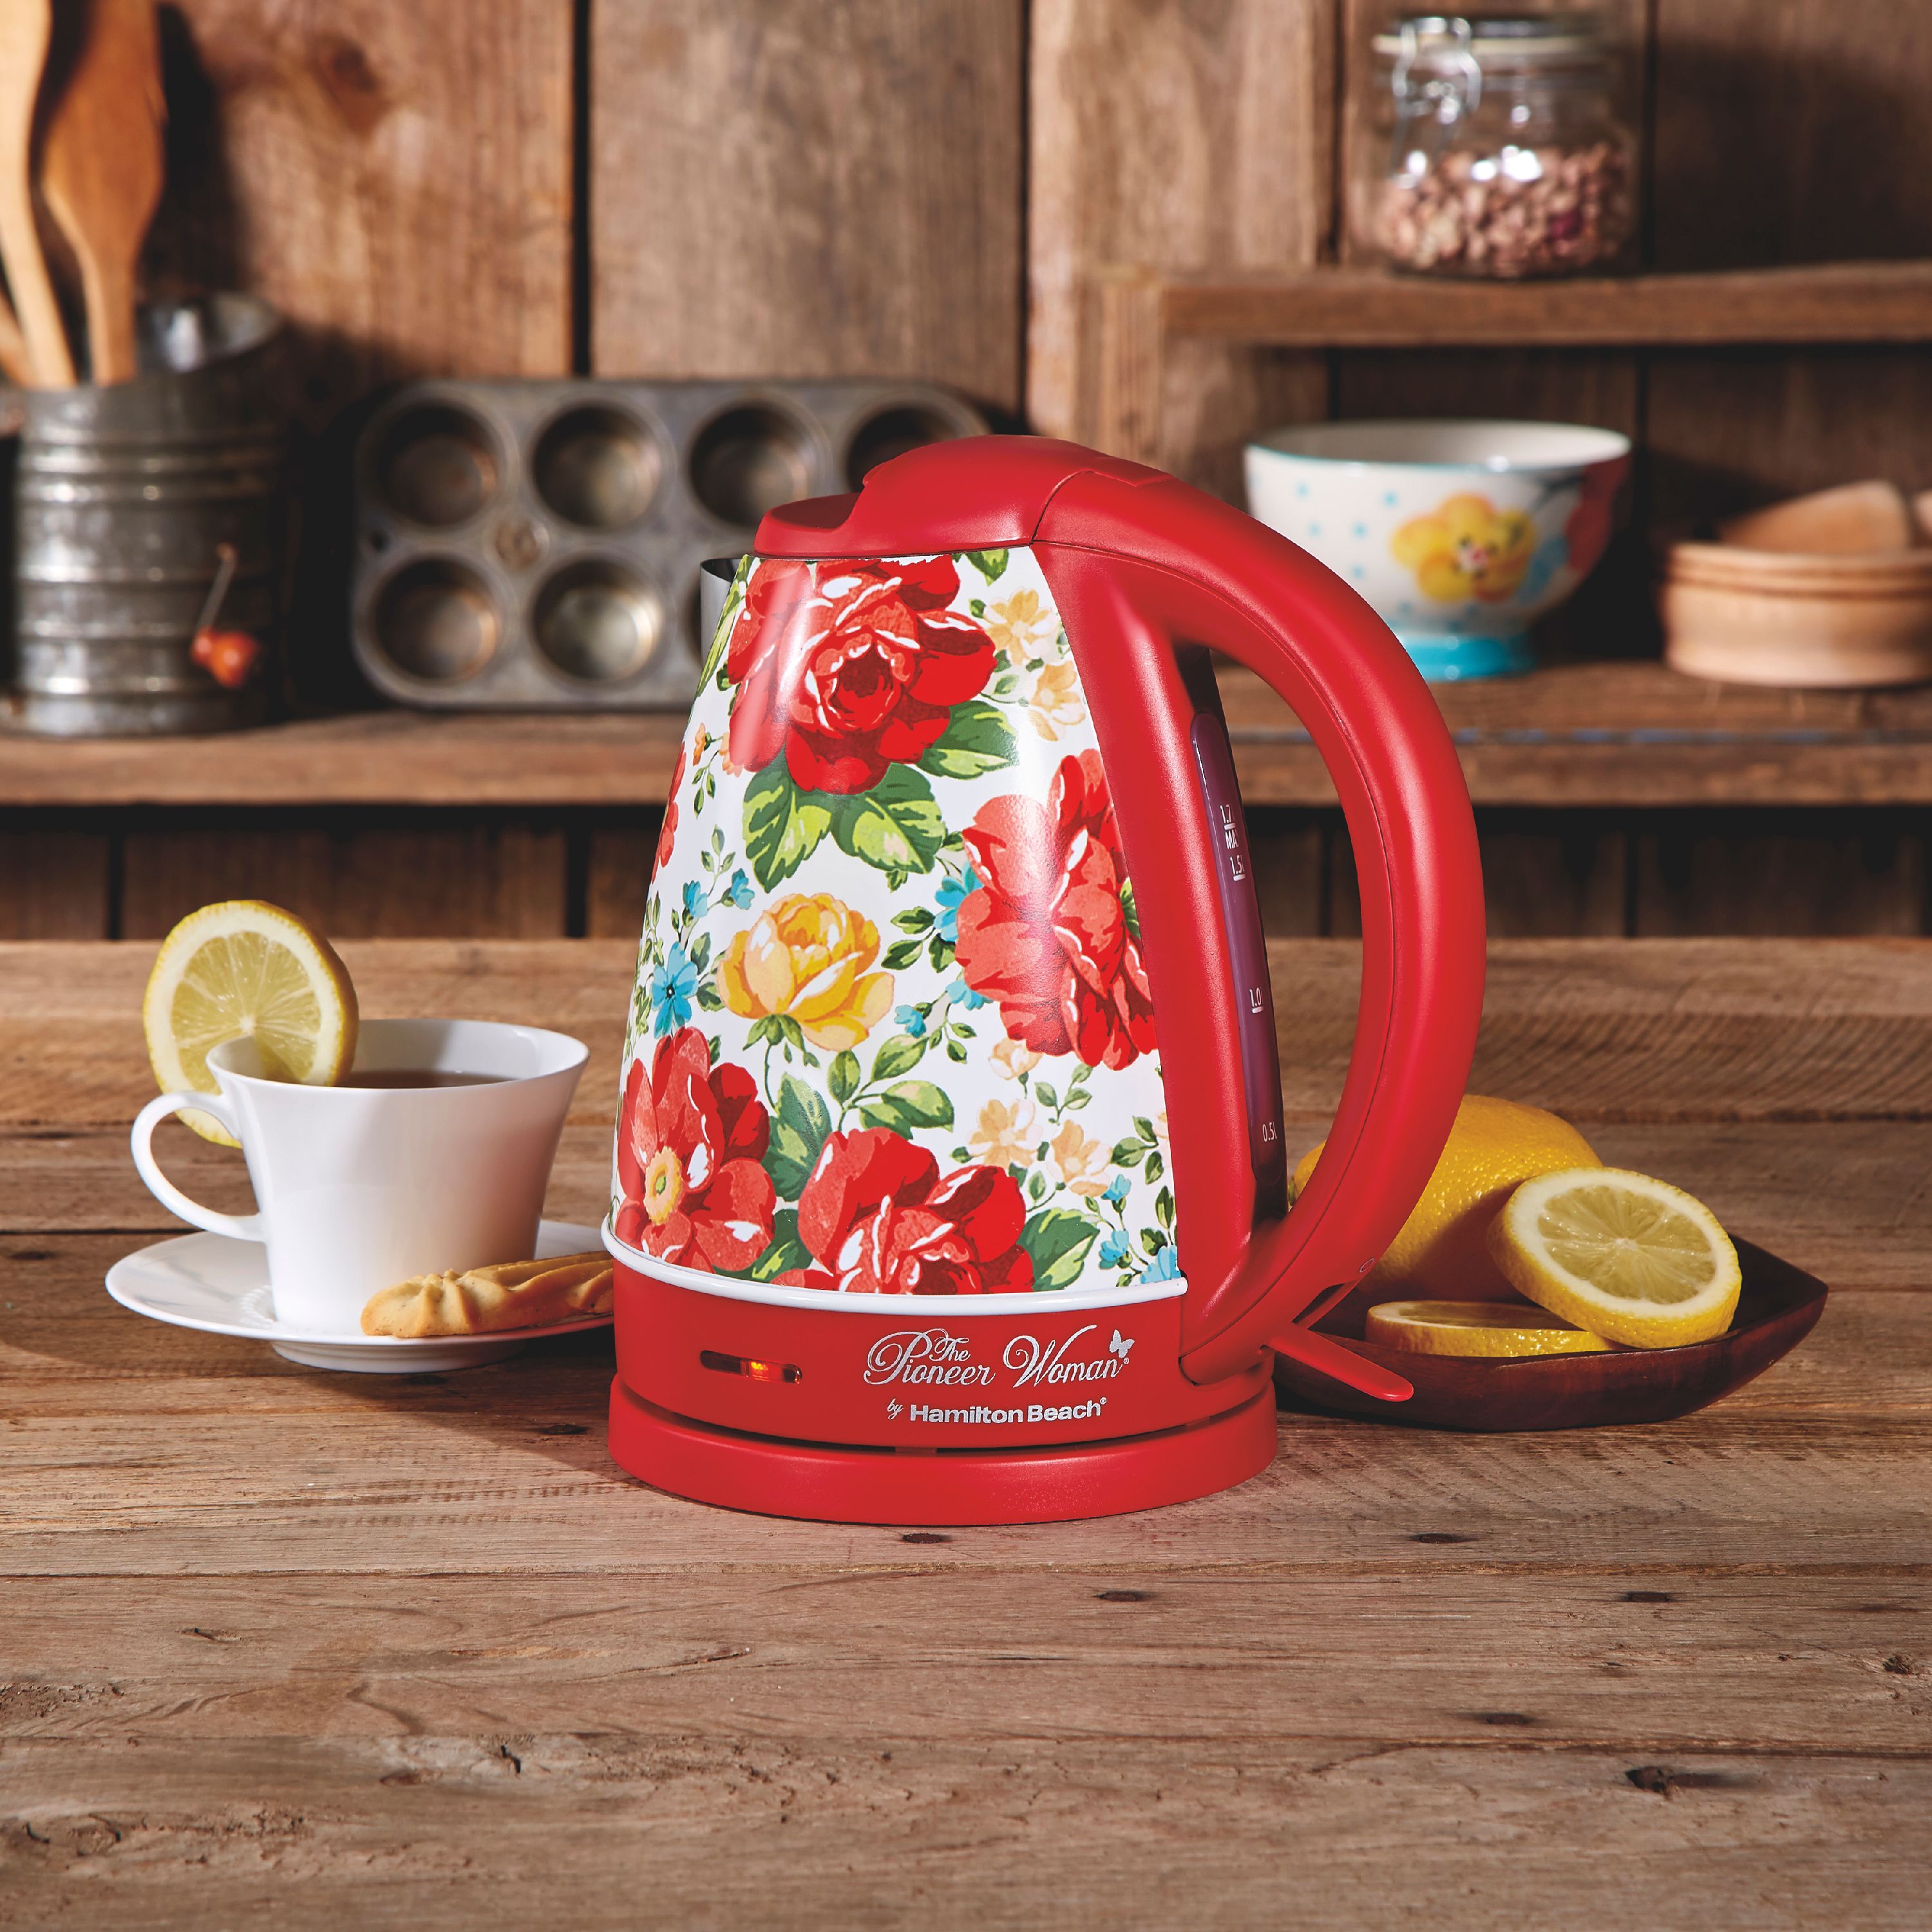 The Pioneer Woman 1.7 Liter Electric Kettle, Vintage Floral Red, 40970 - image 3 of 7